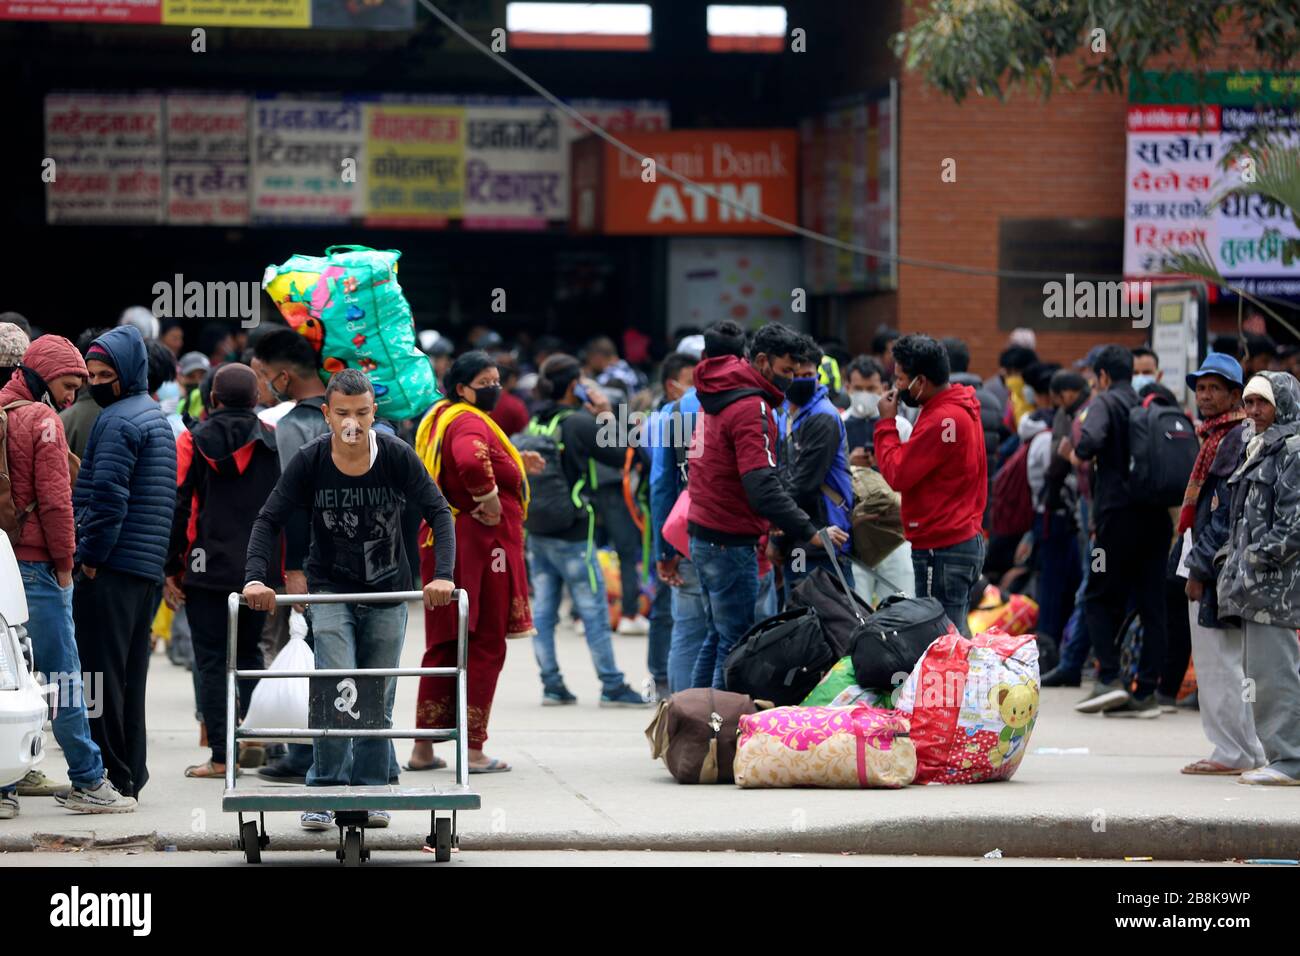 Kathmandu, Nepal. 22nd Mar, 2020. Passengers are seen at a coach station in Kathmandu, Nepal, March 22, 2020. Nepali Prime Minister KP Sharma Oli on March 20 announced a number of prohibitive measures including suspension of long-distance transport operation amid COVID-19 outbreak. In an address to the nation on Friday evening, the prime minister announced that all the long-haul transportation services will be halted from March 23. Credit: Zhou Shengping/Xinhua/Alamy Live News Stock Photo